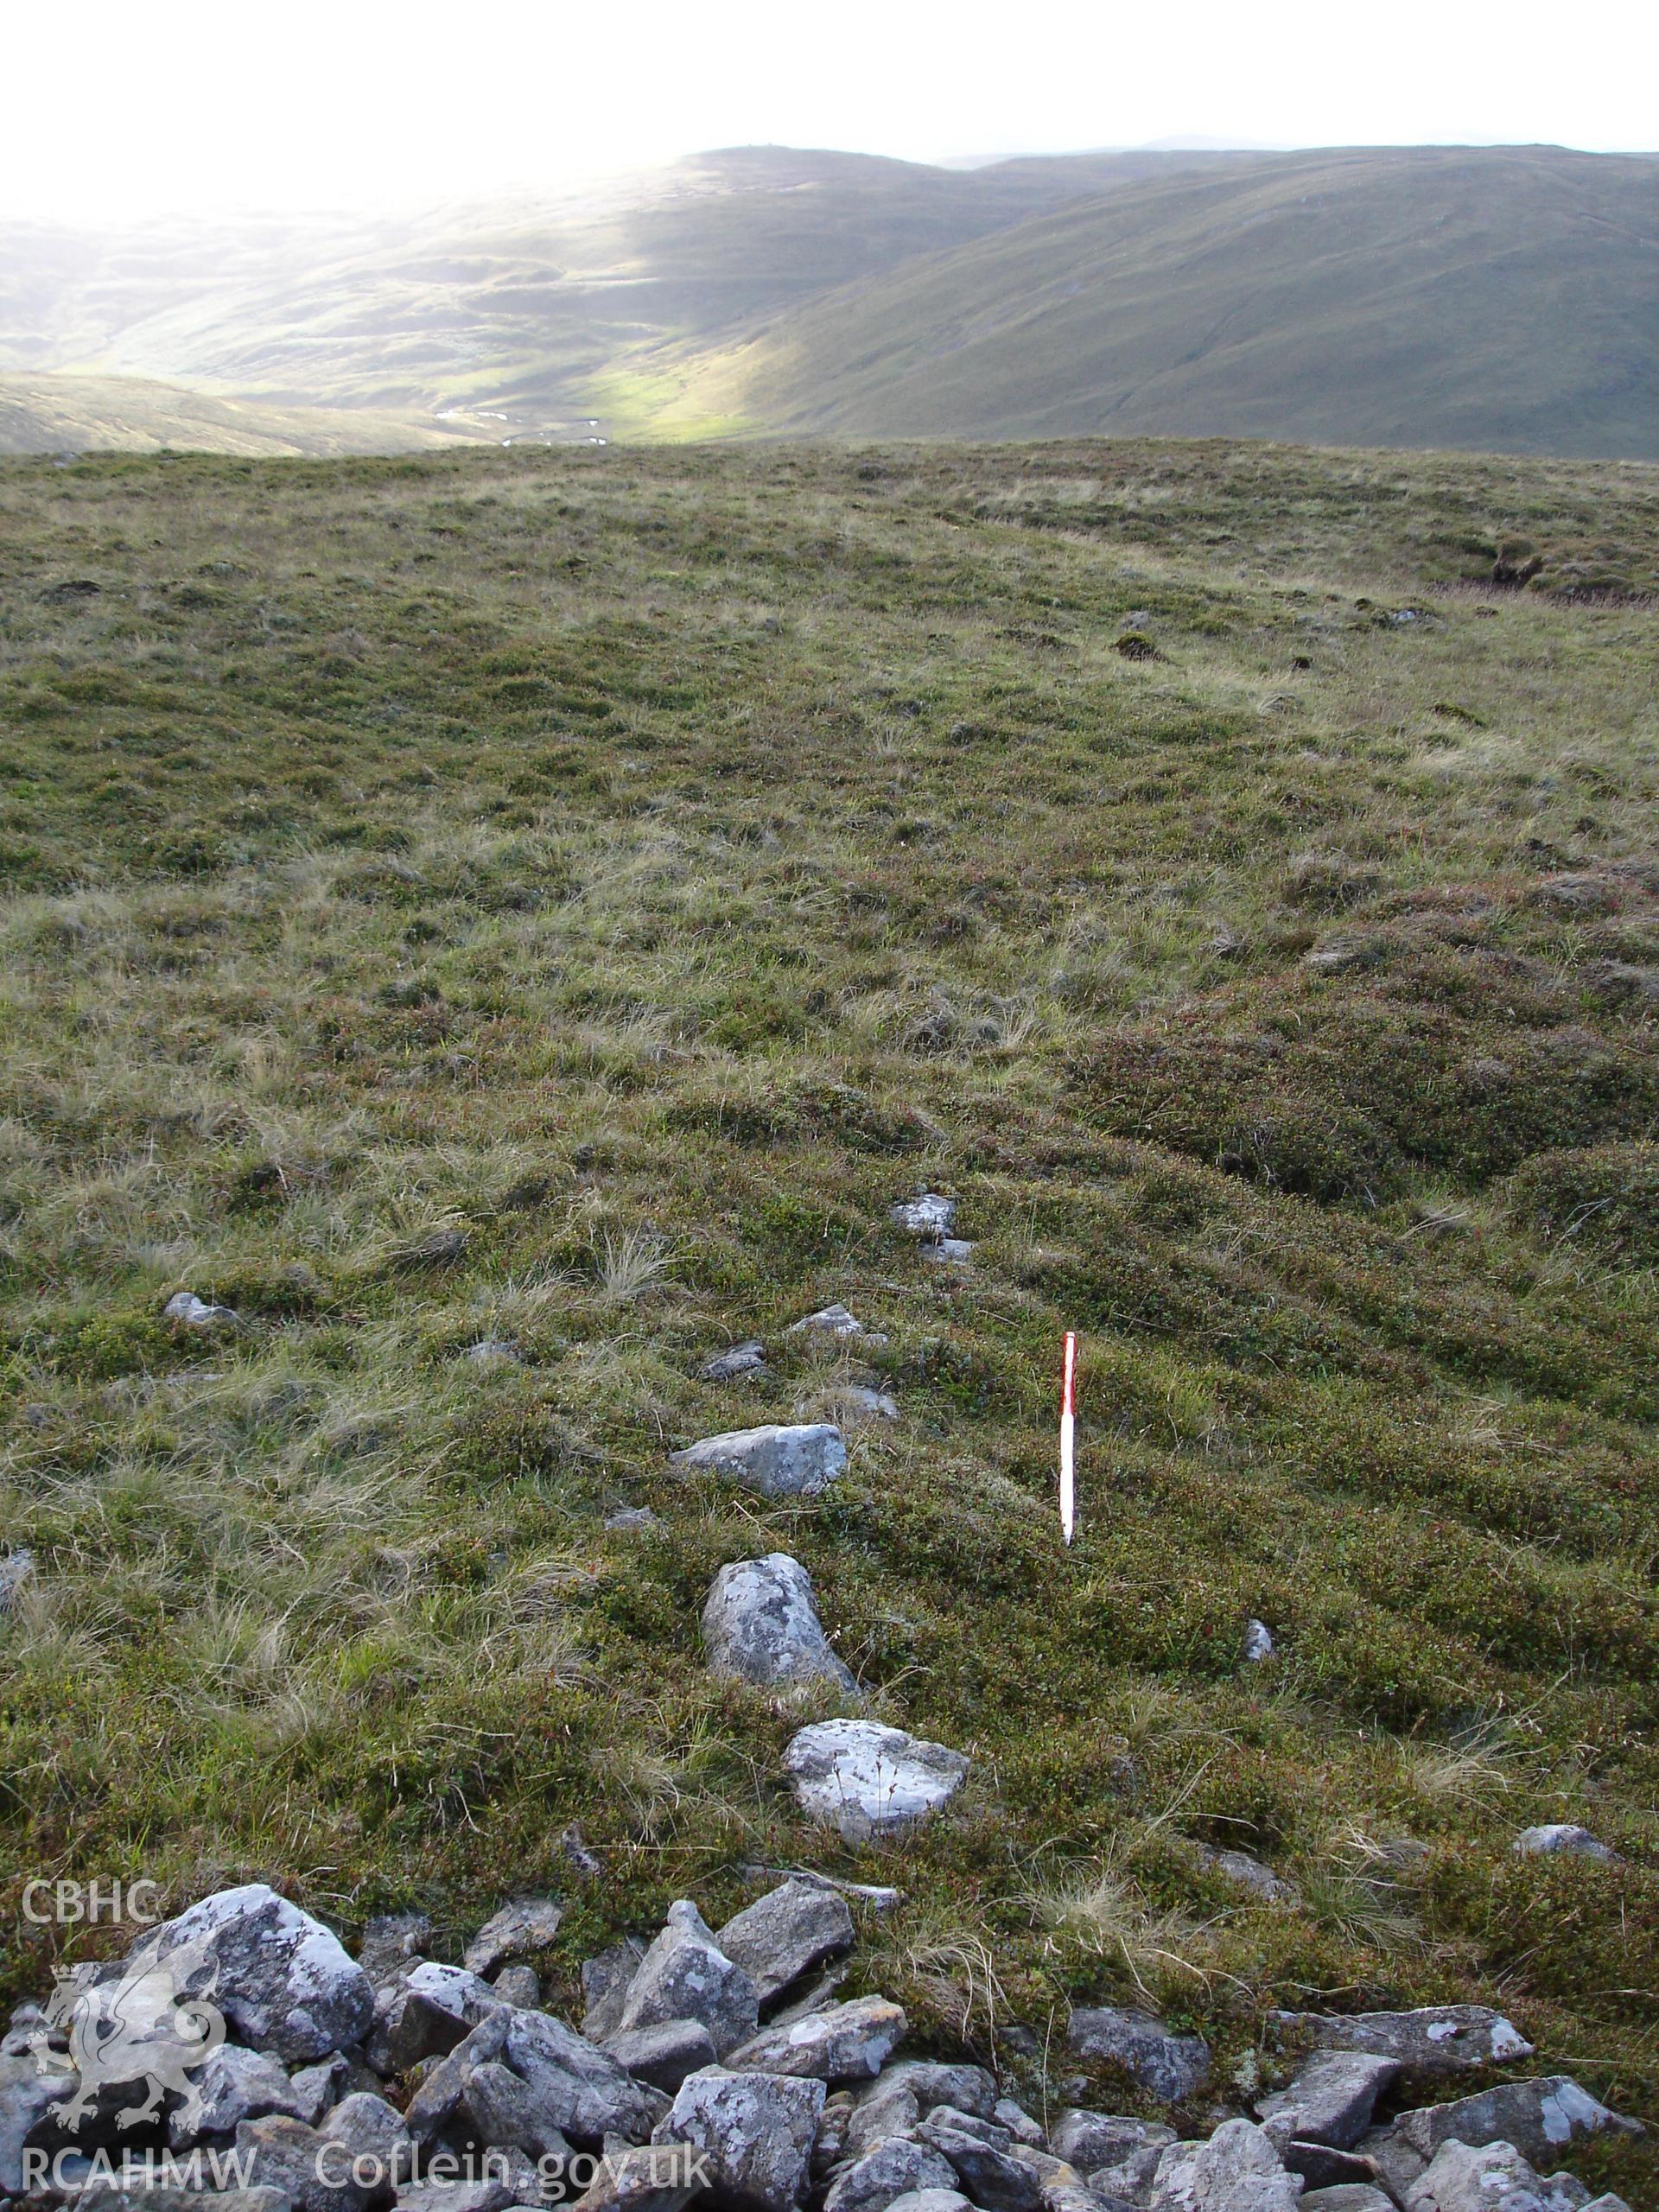 Digital colour photograph of Carn Fawr Cairn I taken on 24/08/2006 by R.P. Sambrook during the Plynlimon Glaslyn South Upland survey undertaken by Trysor.